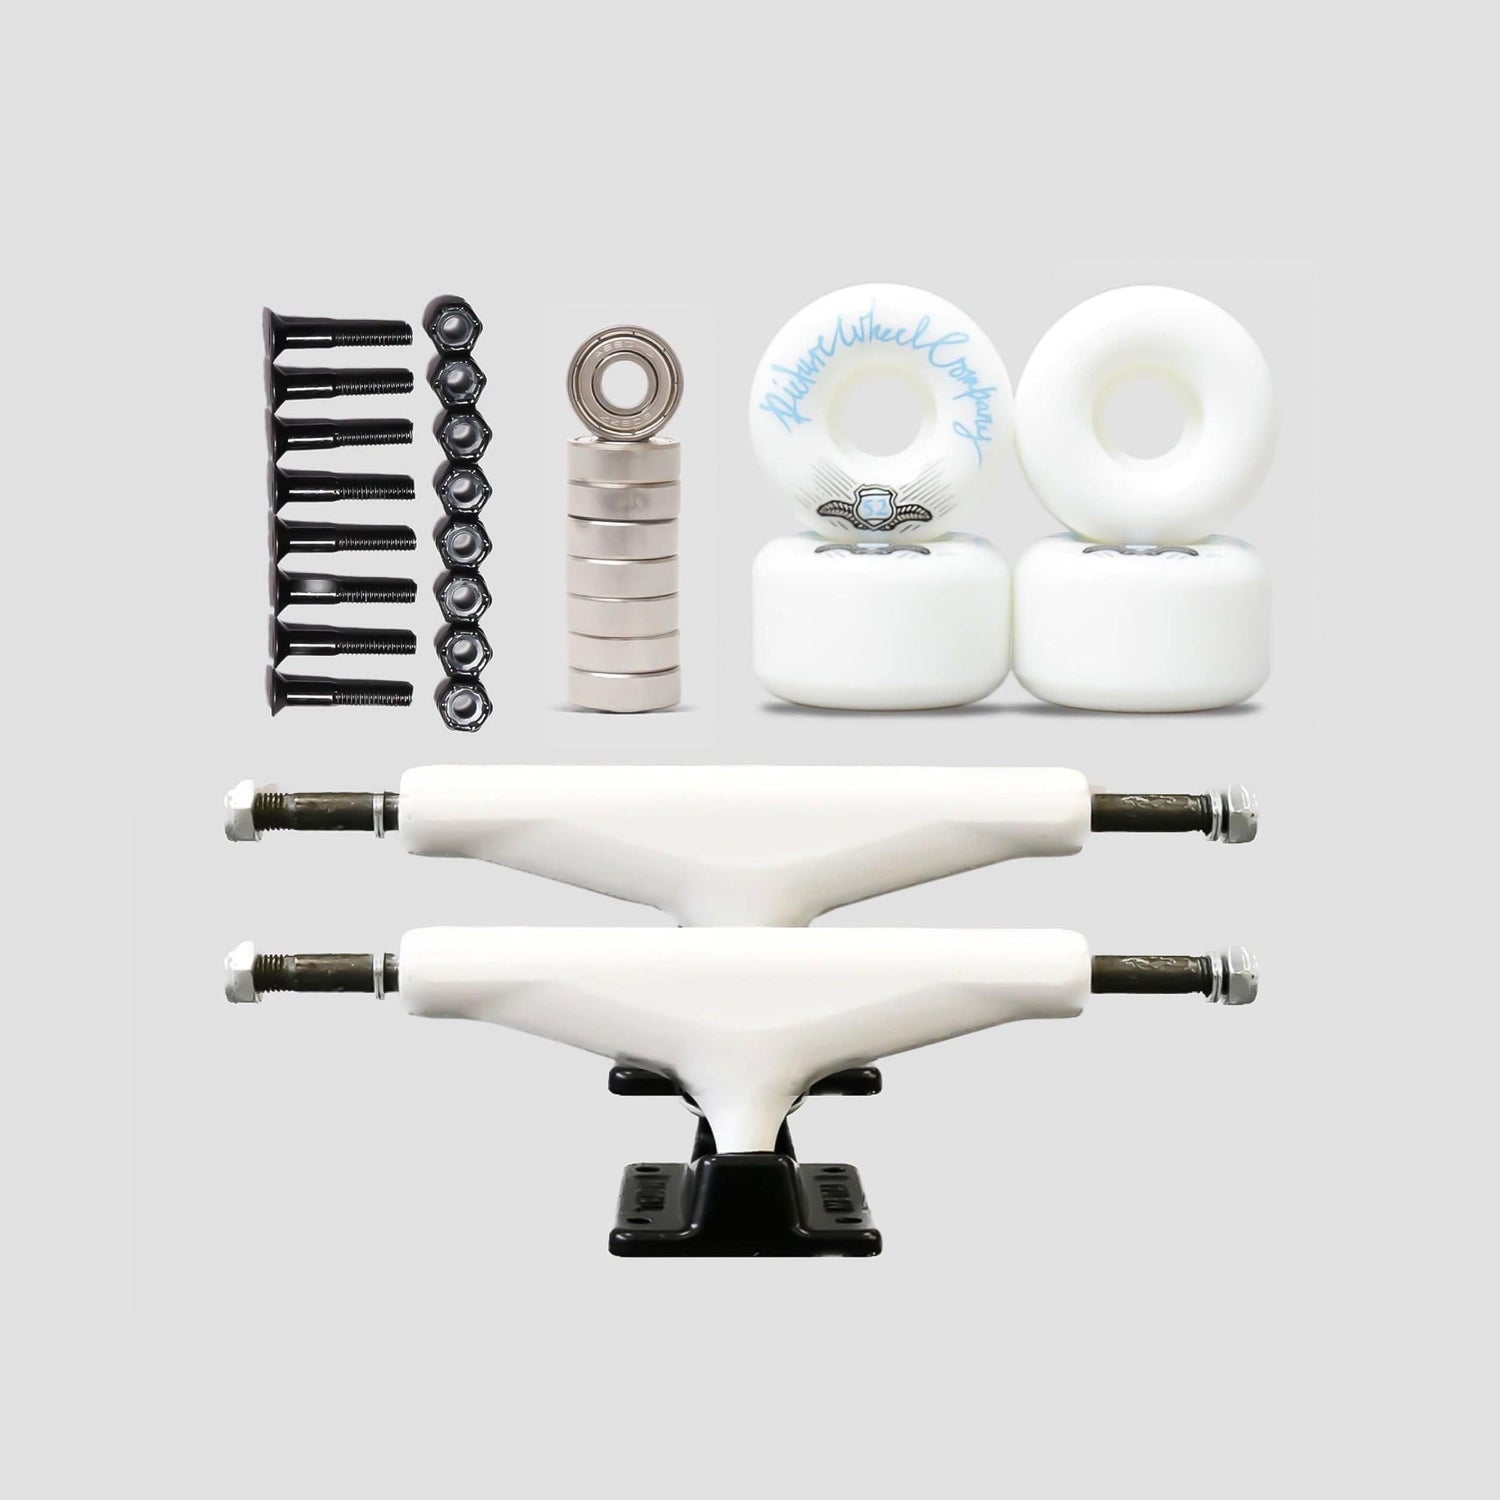 Undercarriage Kits